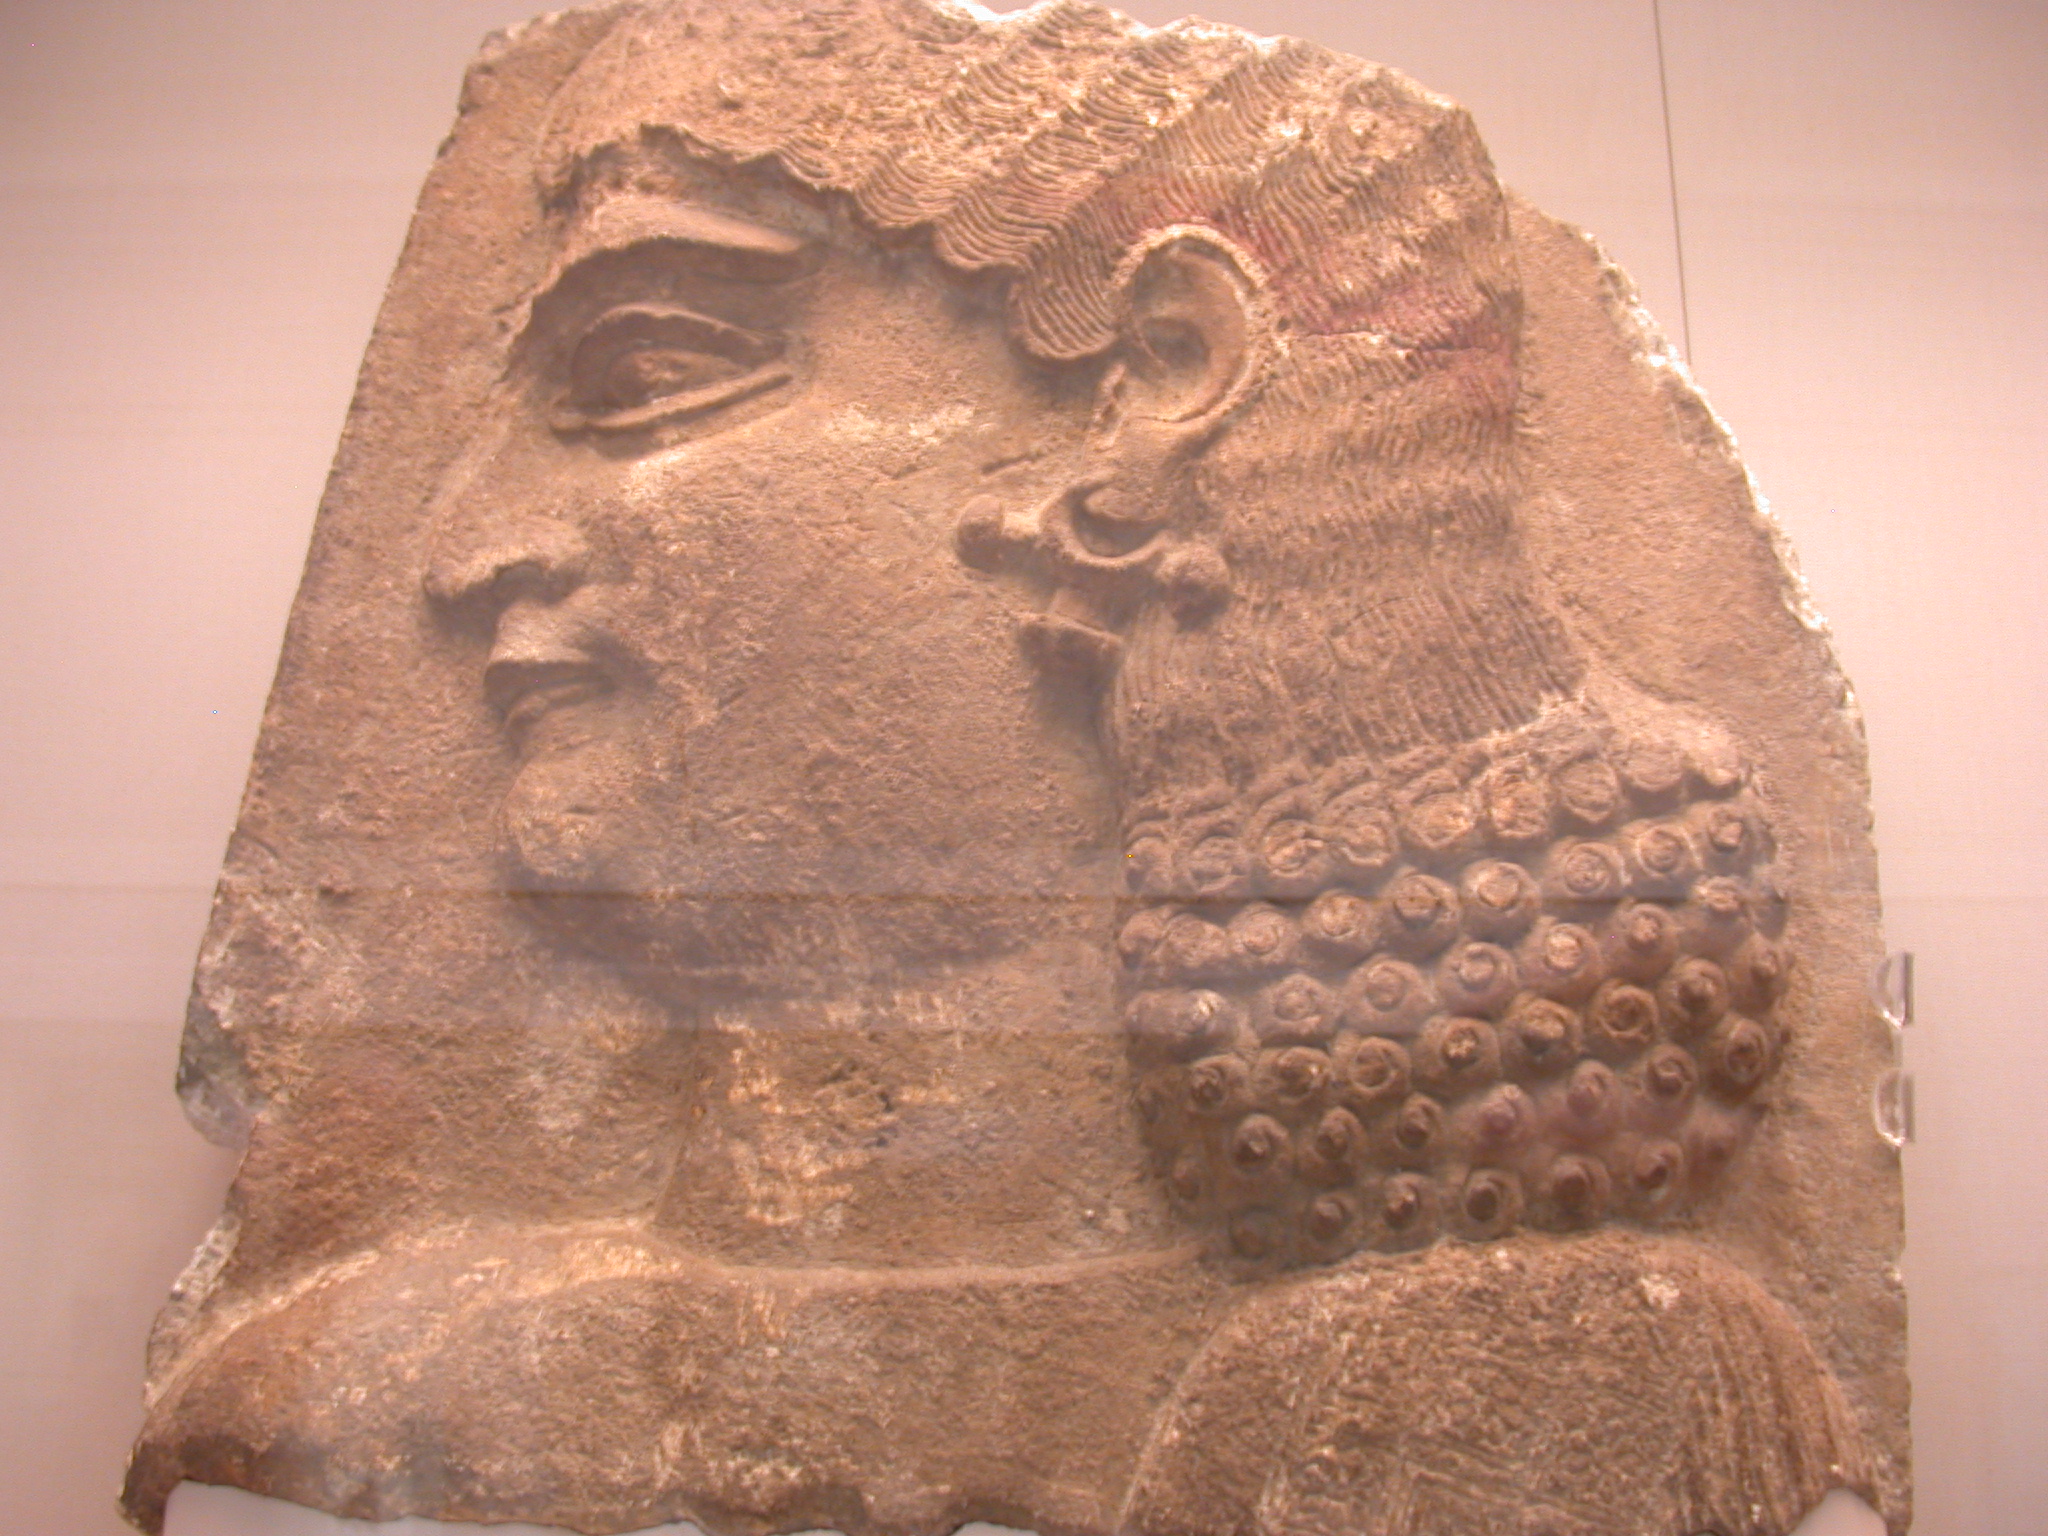 Head of a Eunuch Wearing Red Headband, Gypsum Wall Panel, About 710 BCE, Palace of Sargon, Khorsabad, Assyria, in British Museum, London, England